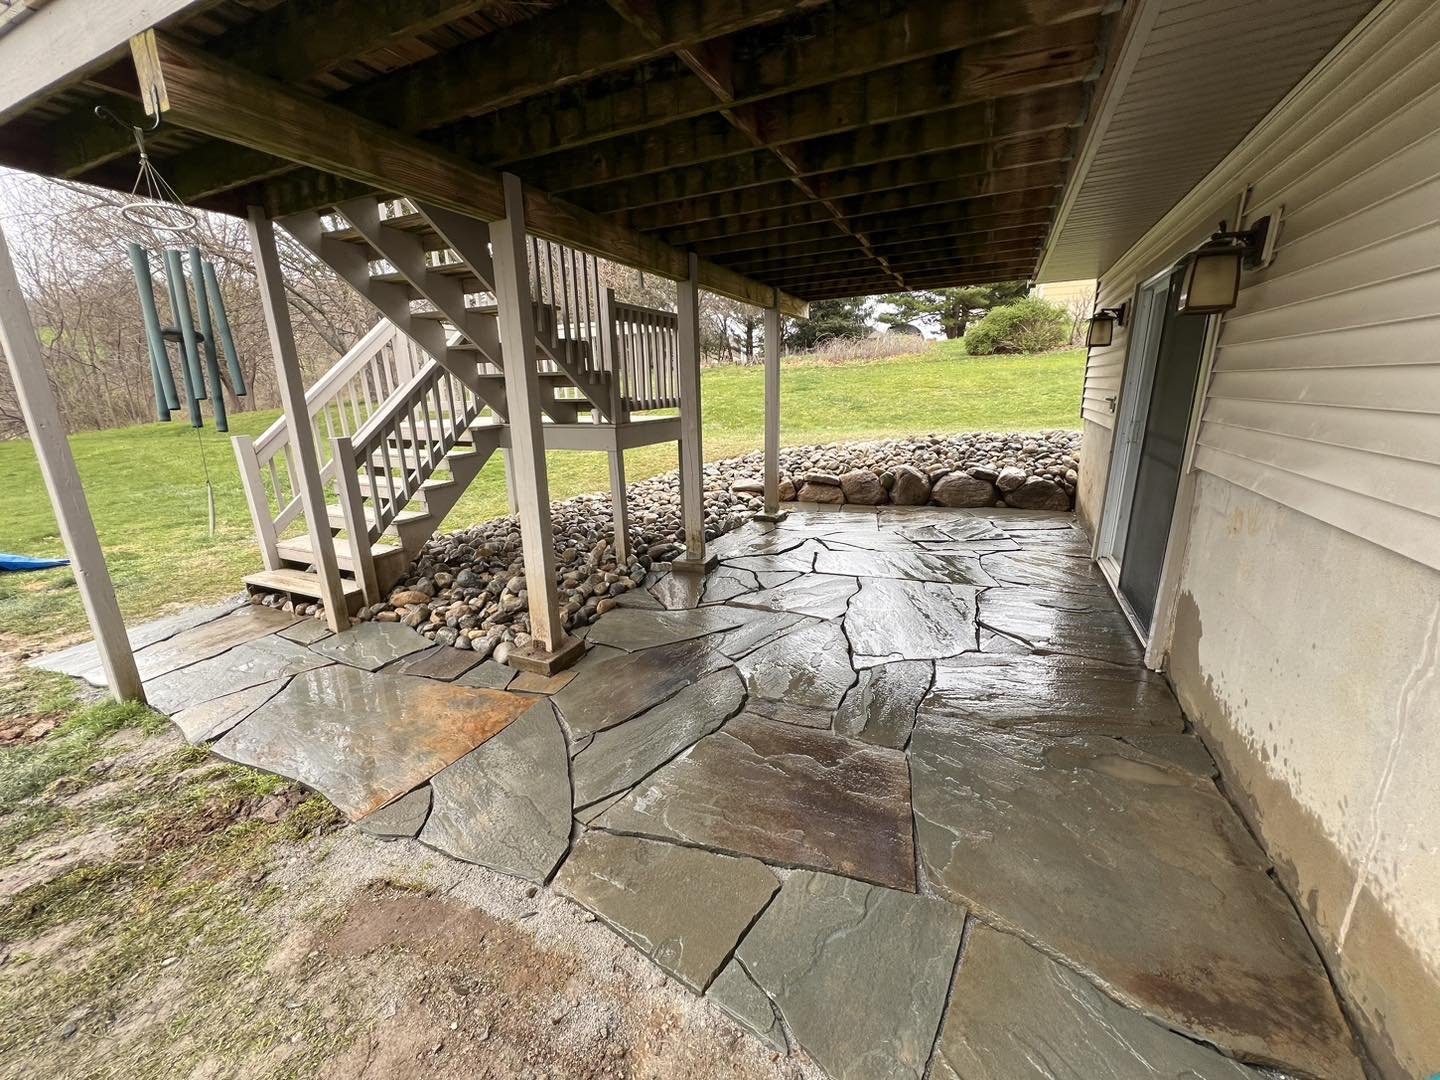 Who said carpenters can't rock the hardscape game? 🤣👍🏽🤣 Check out BC&rsquo;s latest patio masterpiece featuring irregular flagstone and Delaware river stone! 💪🏼⛏️

#brotoncontracting #winglesupply #winglesupplycompany #irregularflagstone #delaw